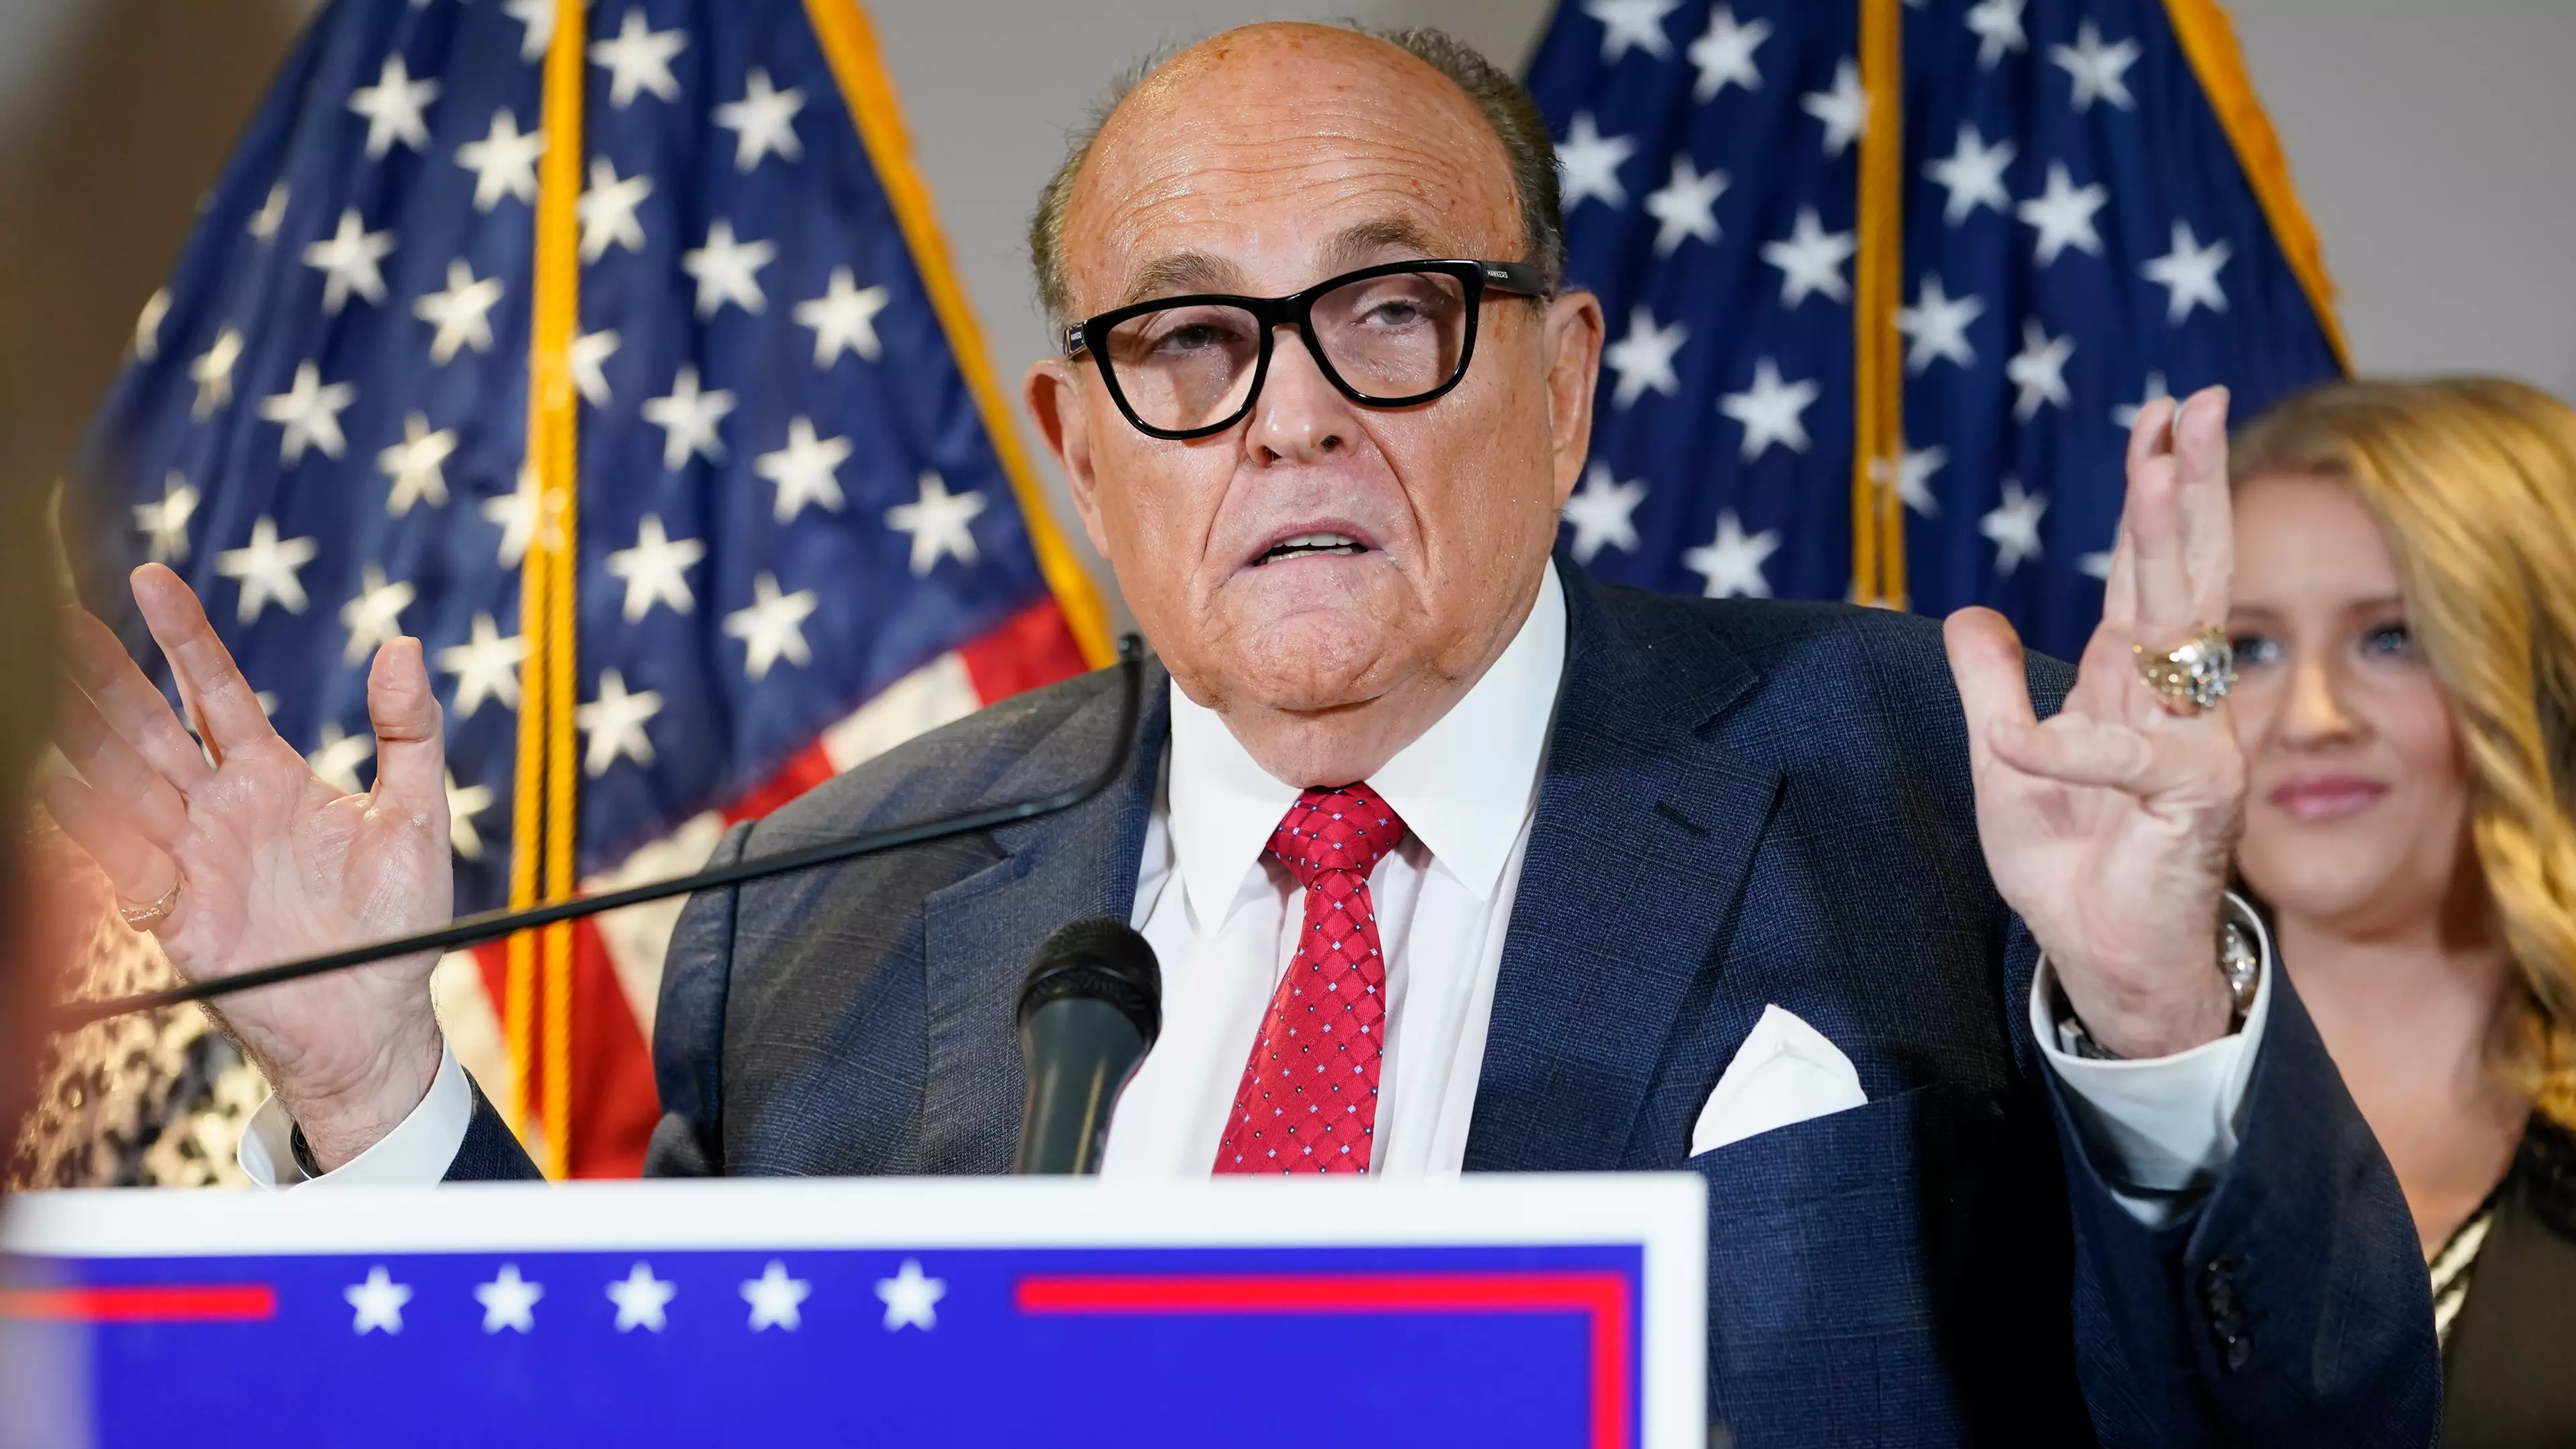 Legal Challenge Launched To Disbar Rudy Giuliani Because Of 'Fraud' And 'Deceit'